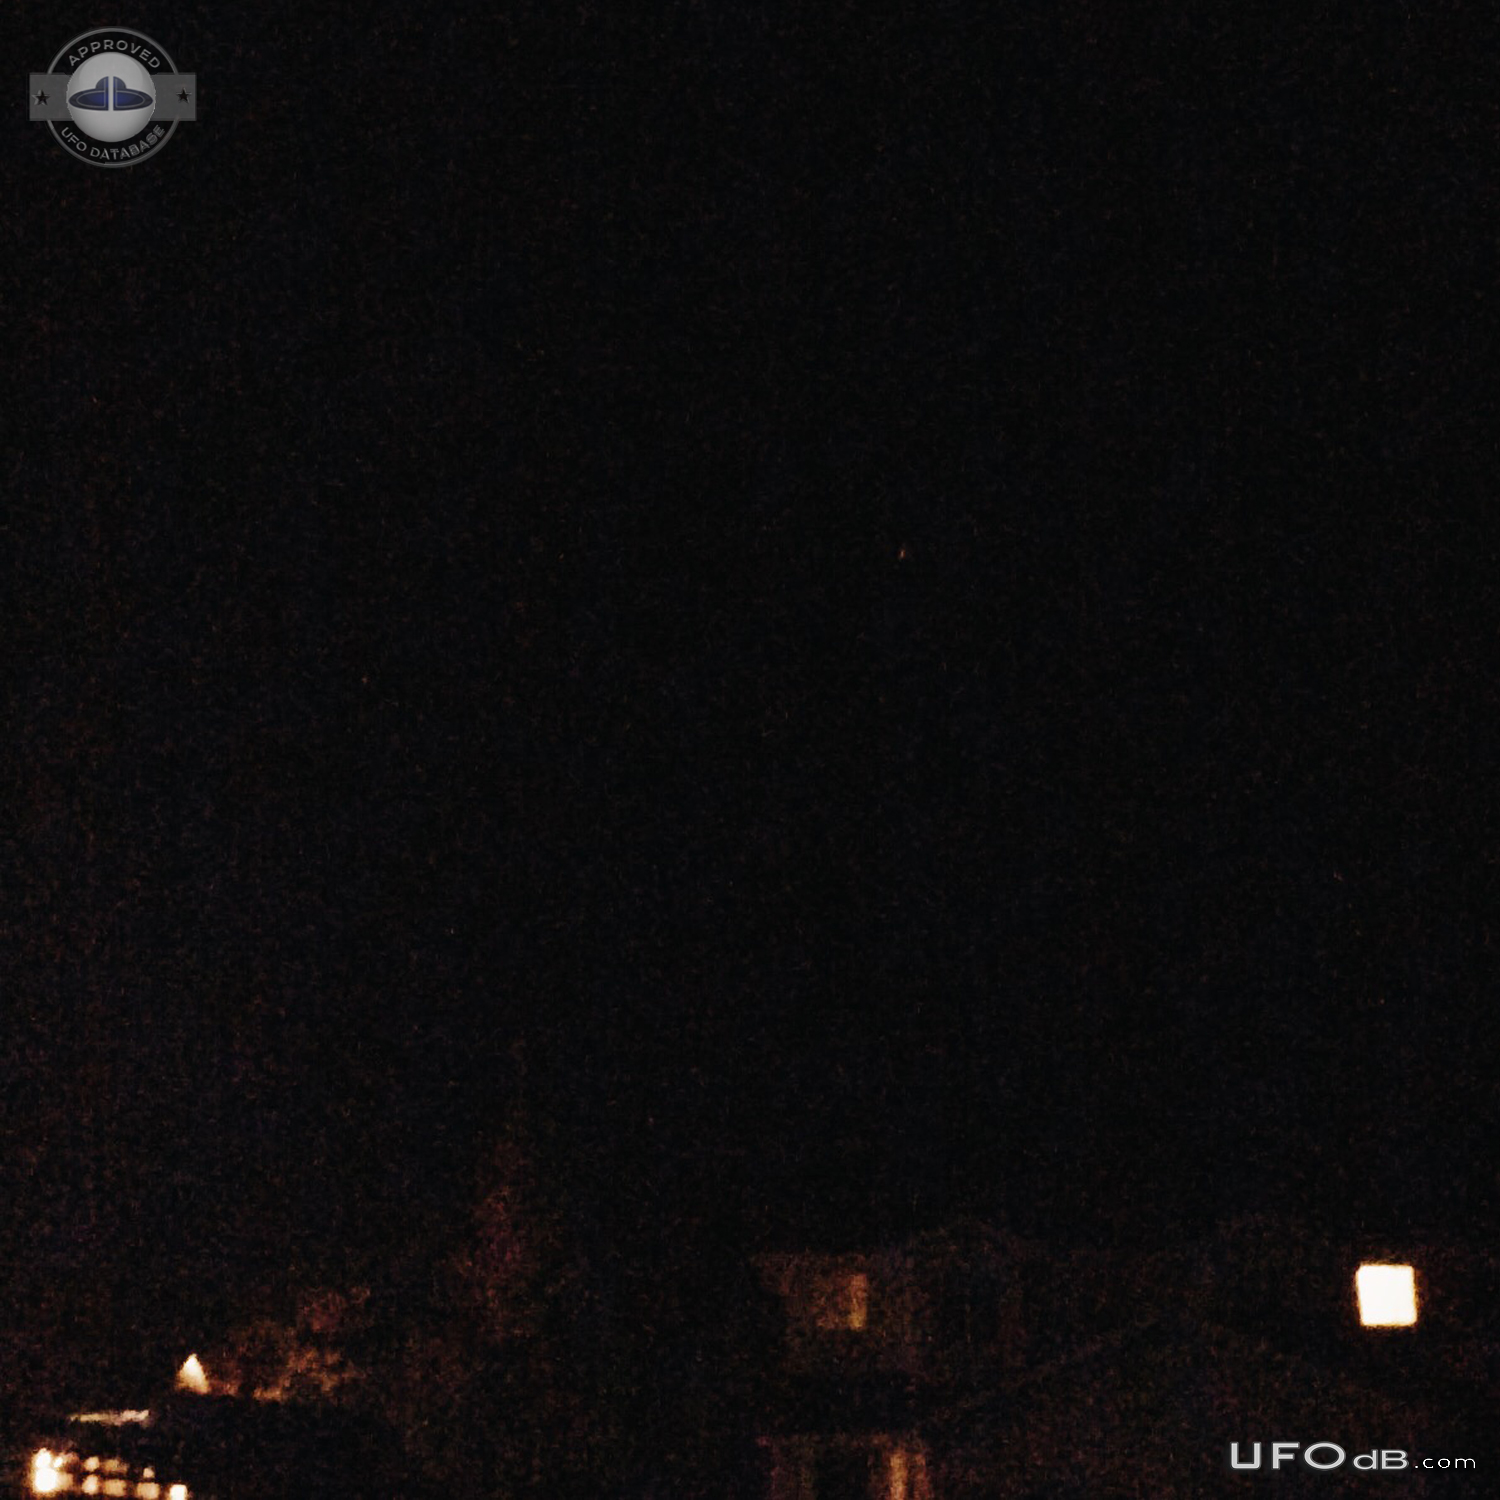 Saw a bright glowing orange UFO hover and move oddly in the night sky  UFO Picture #756-1